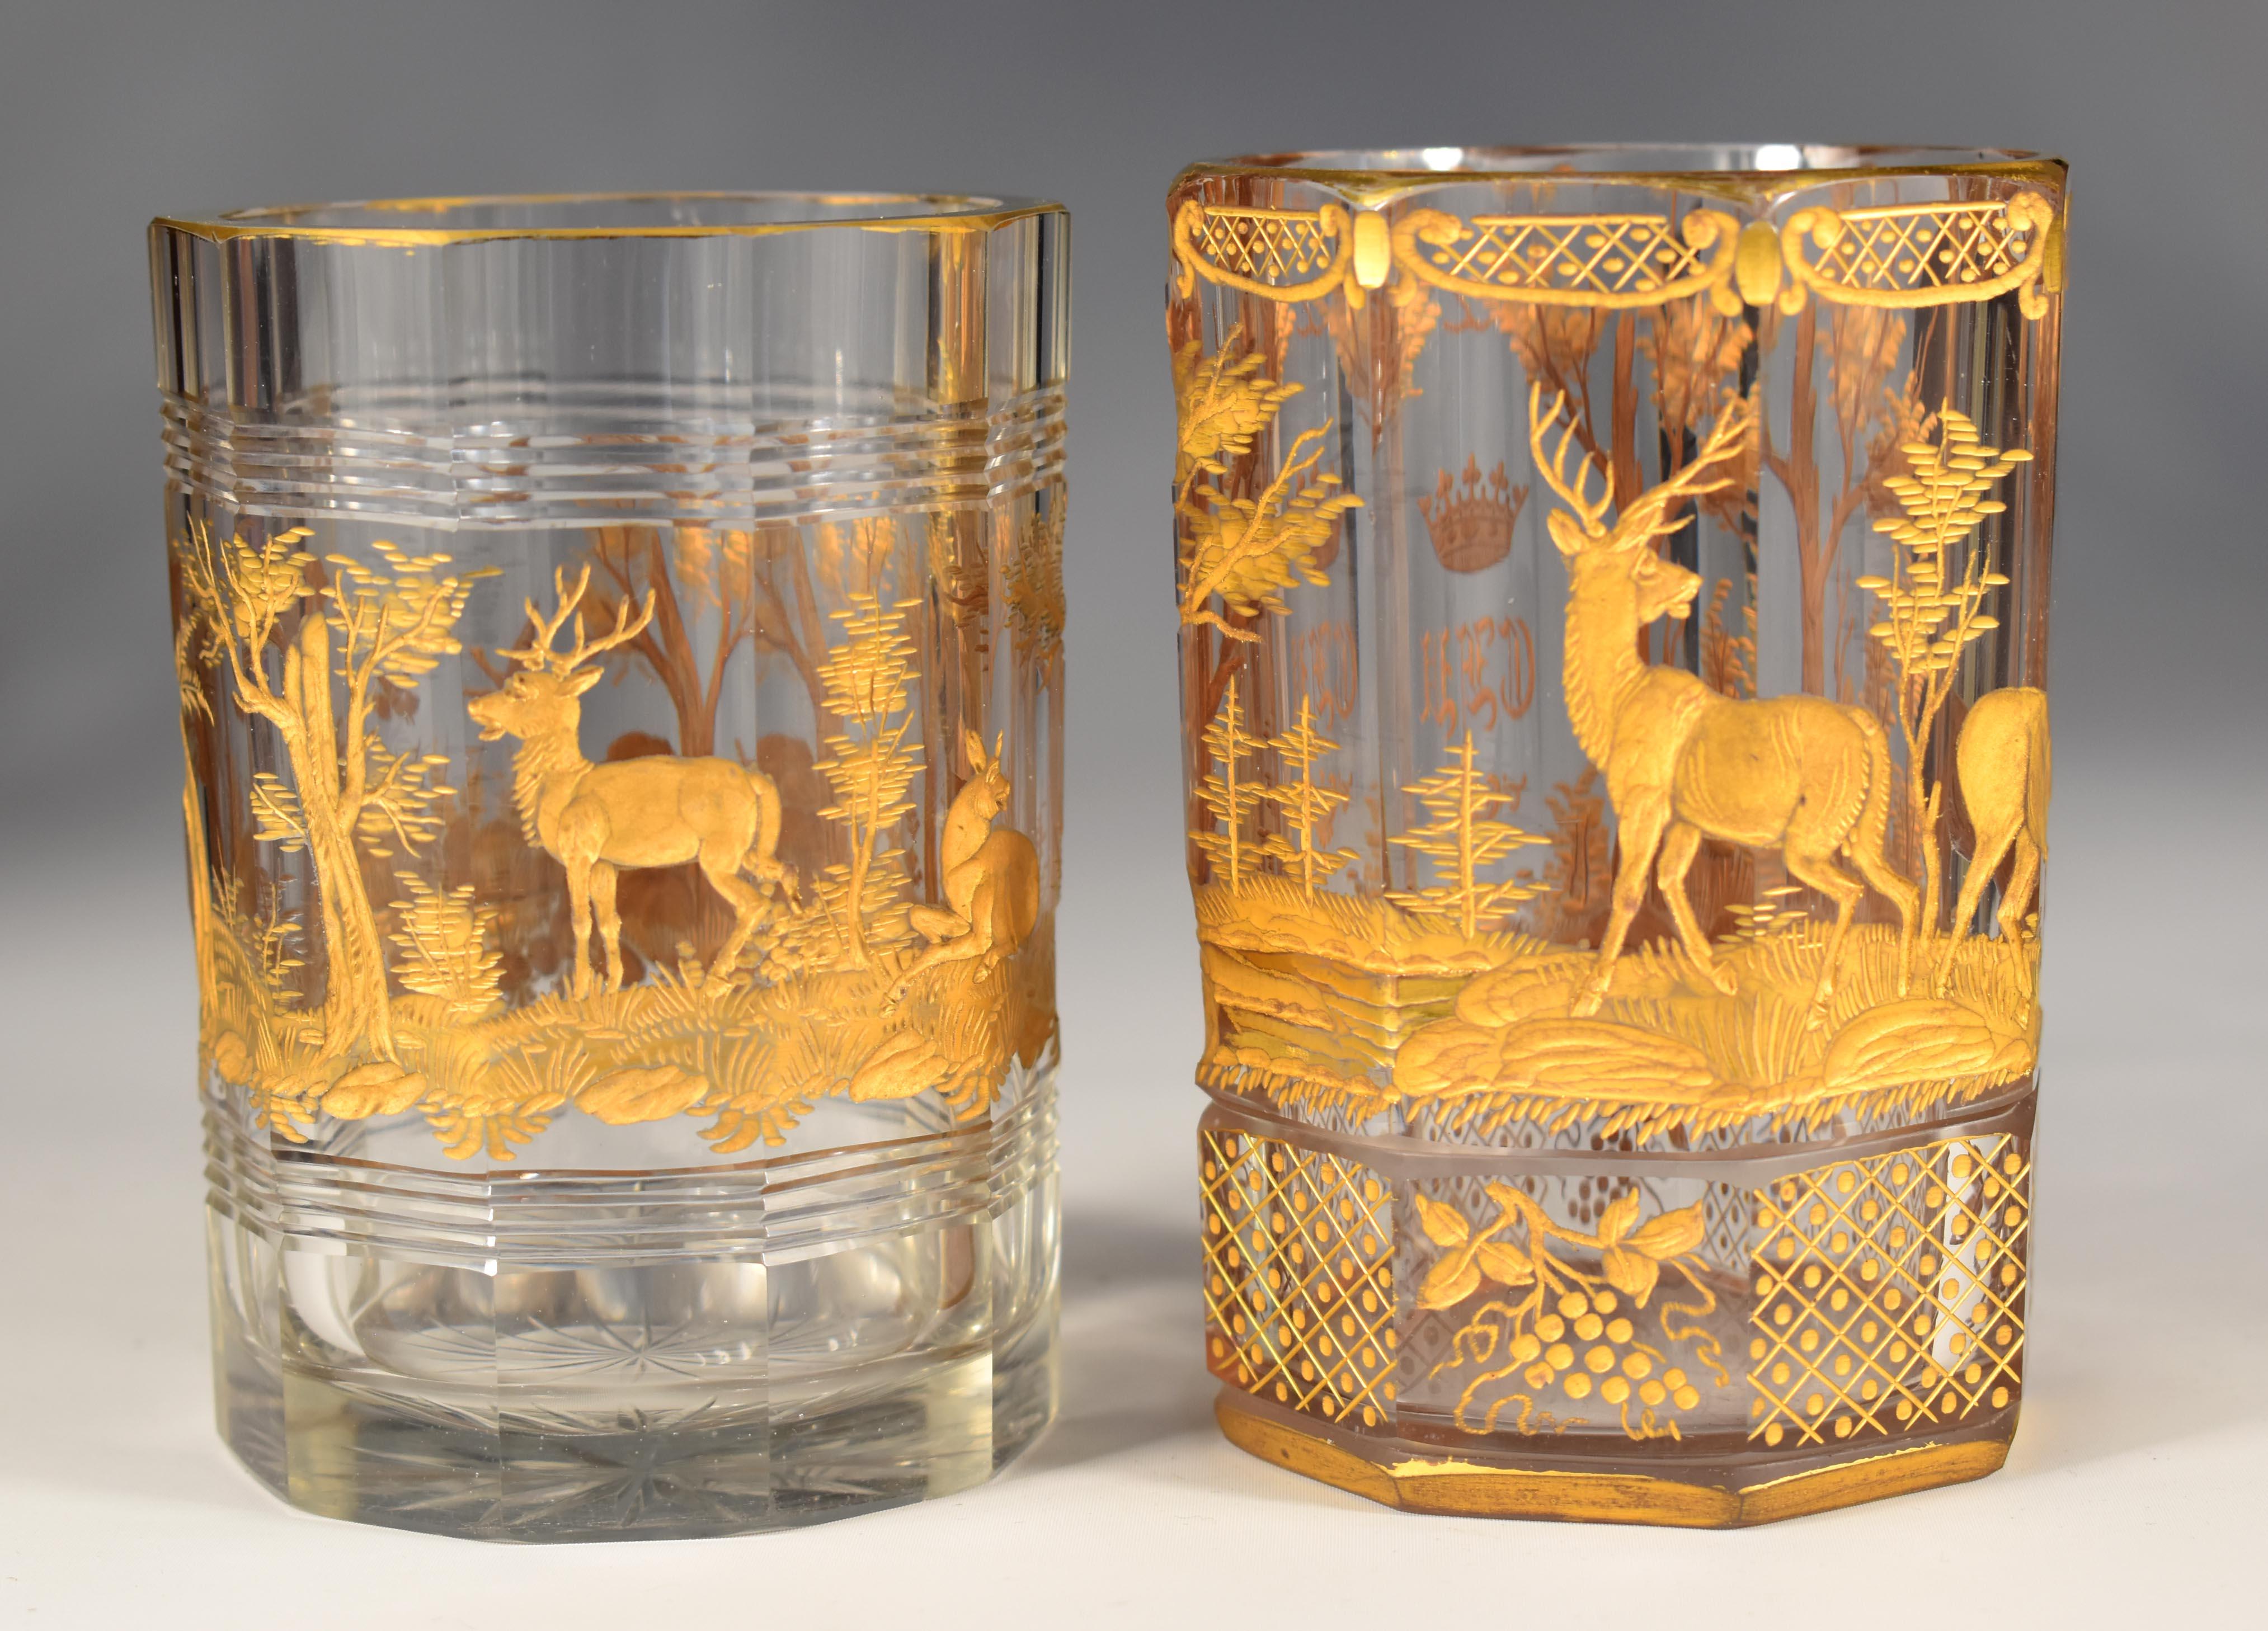 Gilded Vase + Two Gilded Glasses - Hunting motif. 20th century For Sale 11